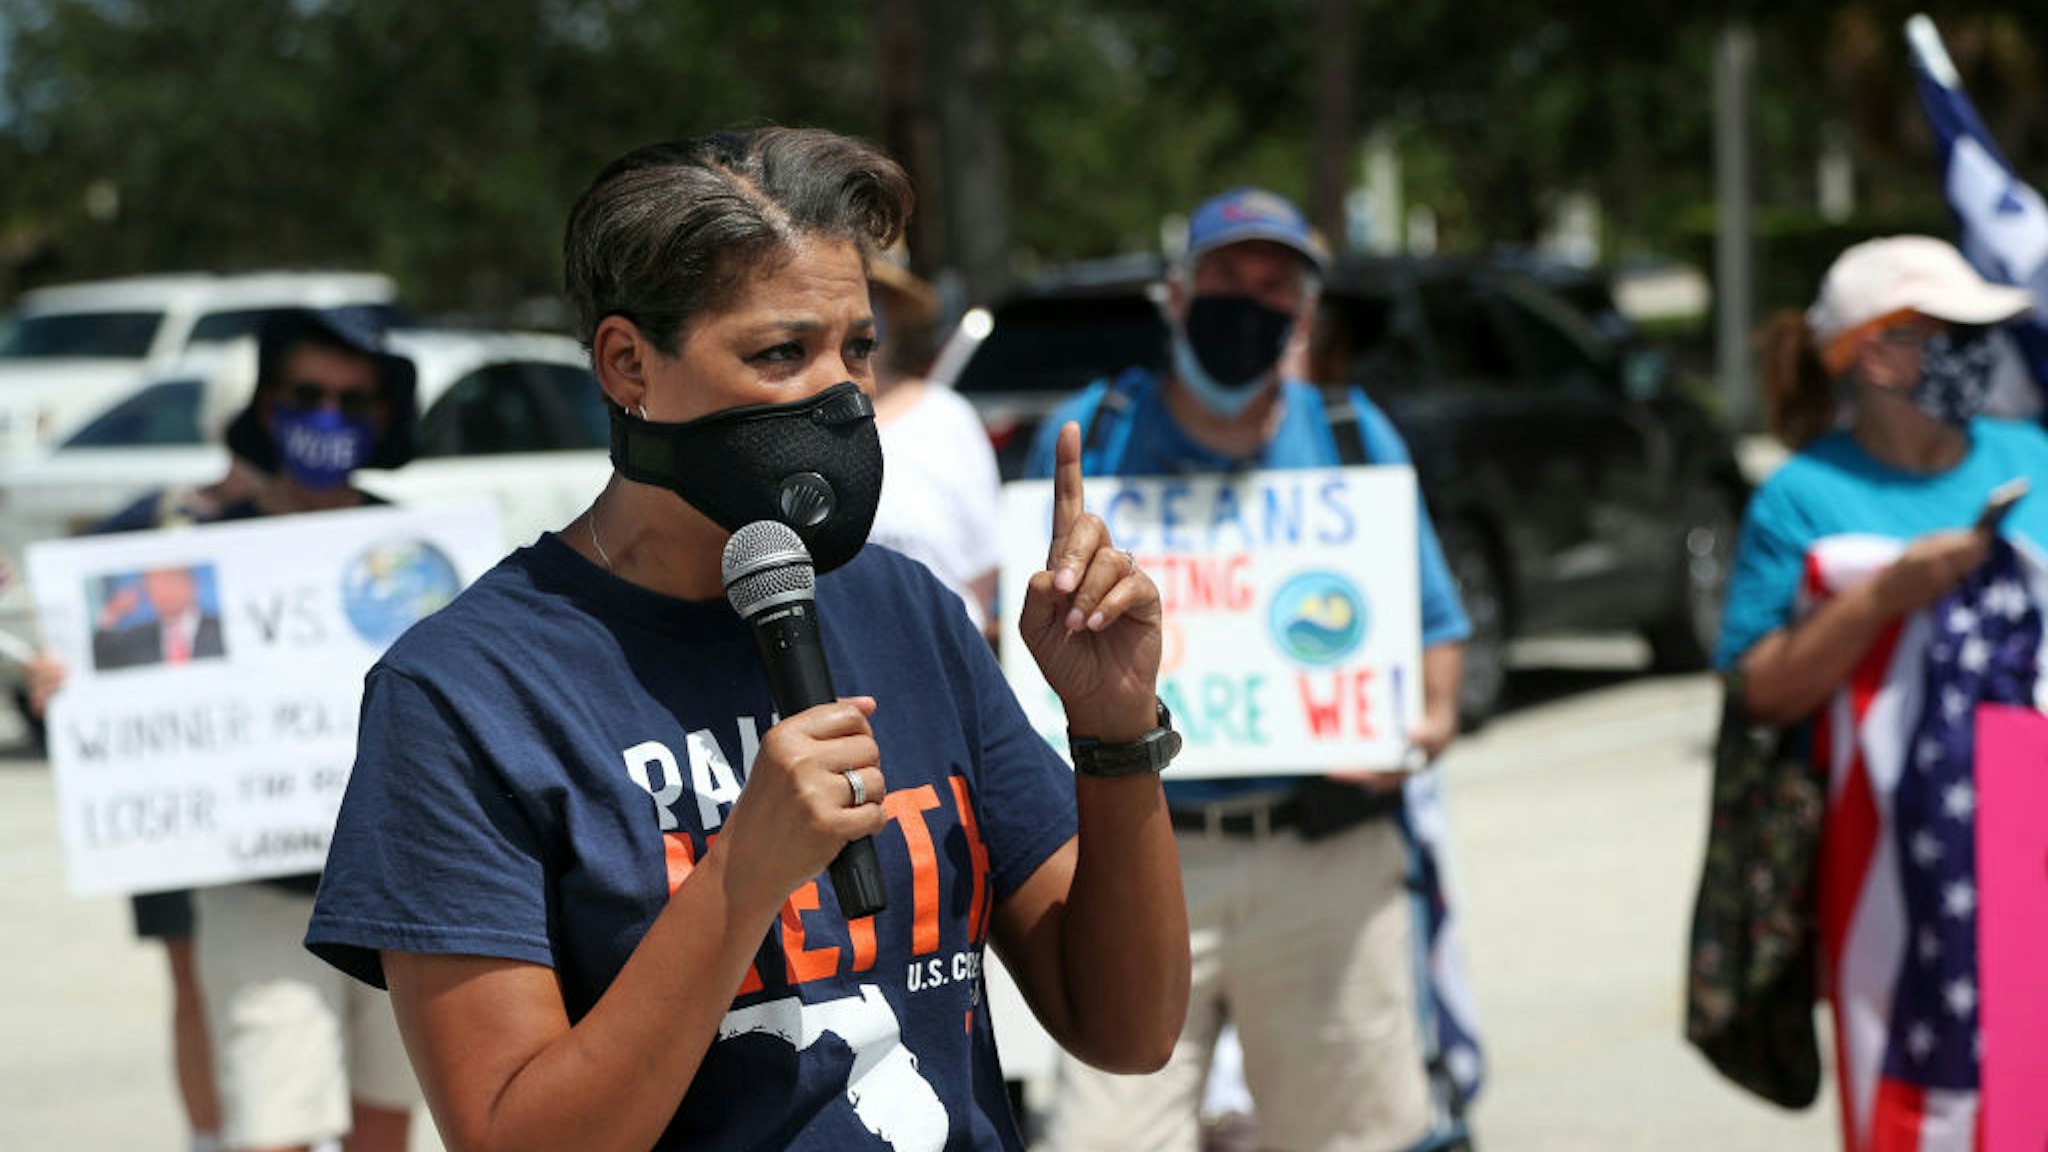 Congressional candidate Pam Keith, who is running against Rep. Brian Mast, speaks to anti-Trump protesters at Burt Reynolds Park in Jupiter, Florida on Tuesday, Sept. 8, 2020. President Donald Trump made an appearance at the Jupiter Inlet Lighthouse touting his environmental policies and announcing he's extending the moratorium on offshore oil drilling in Florida.